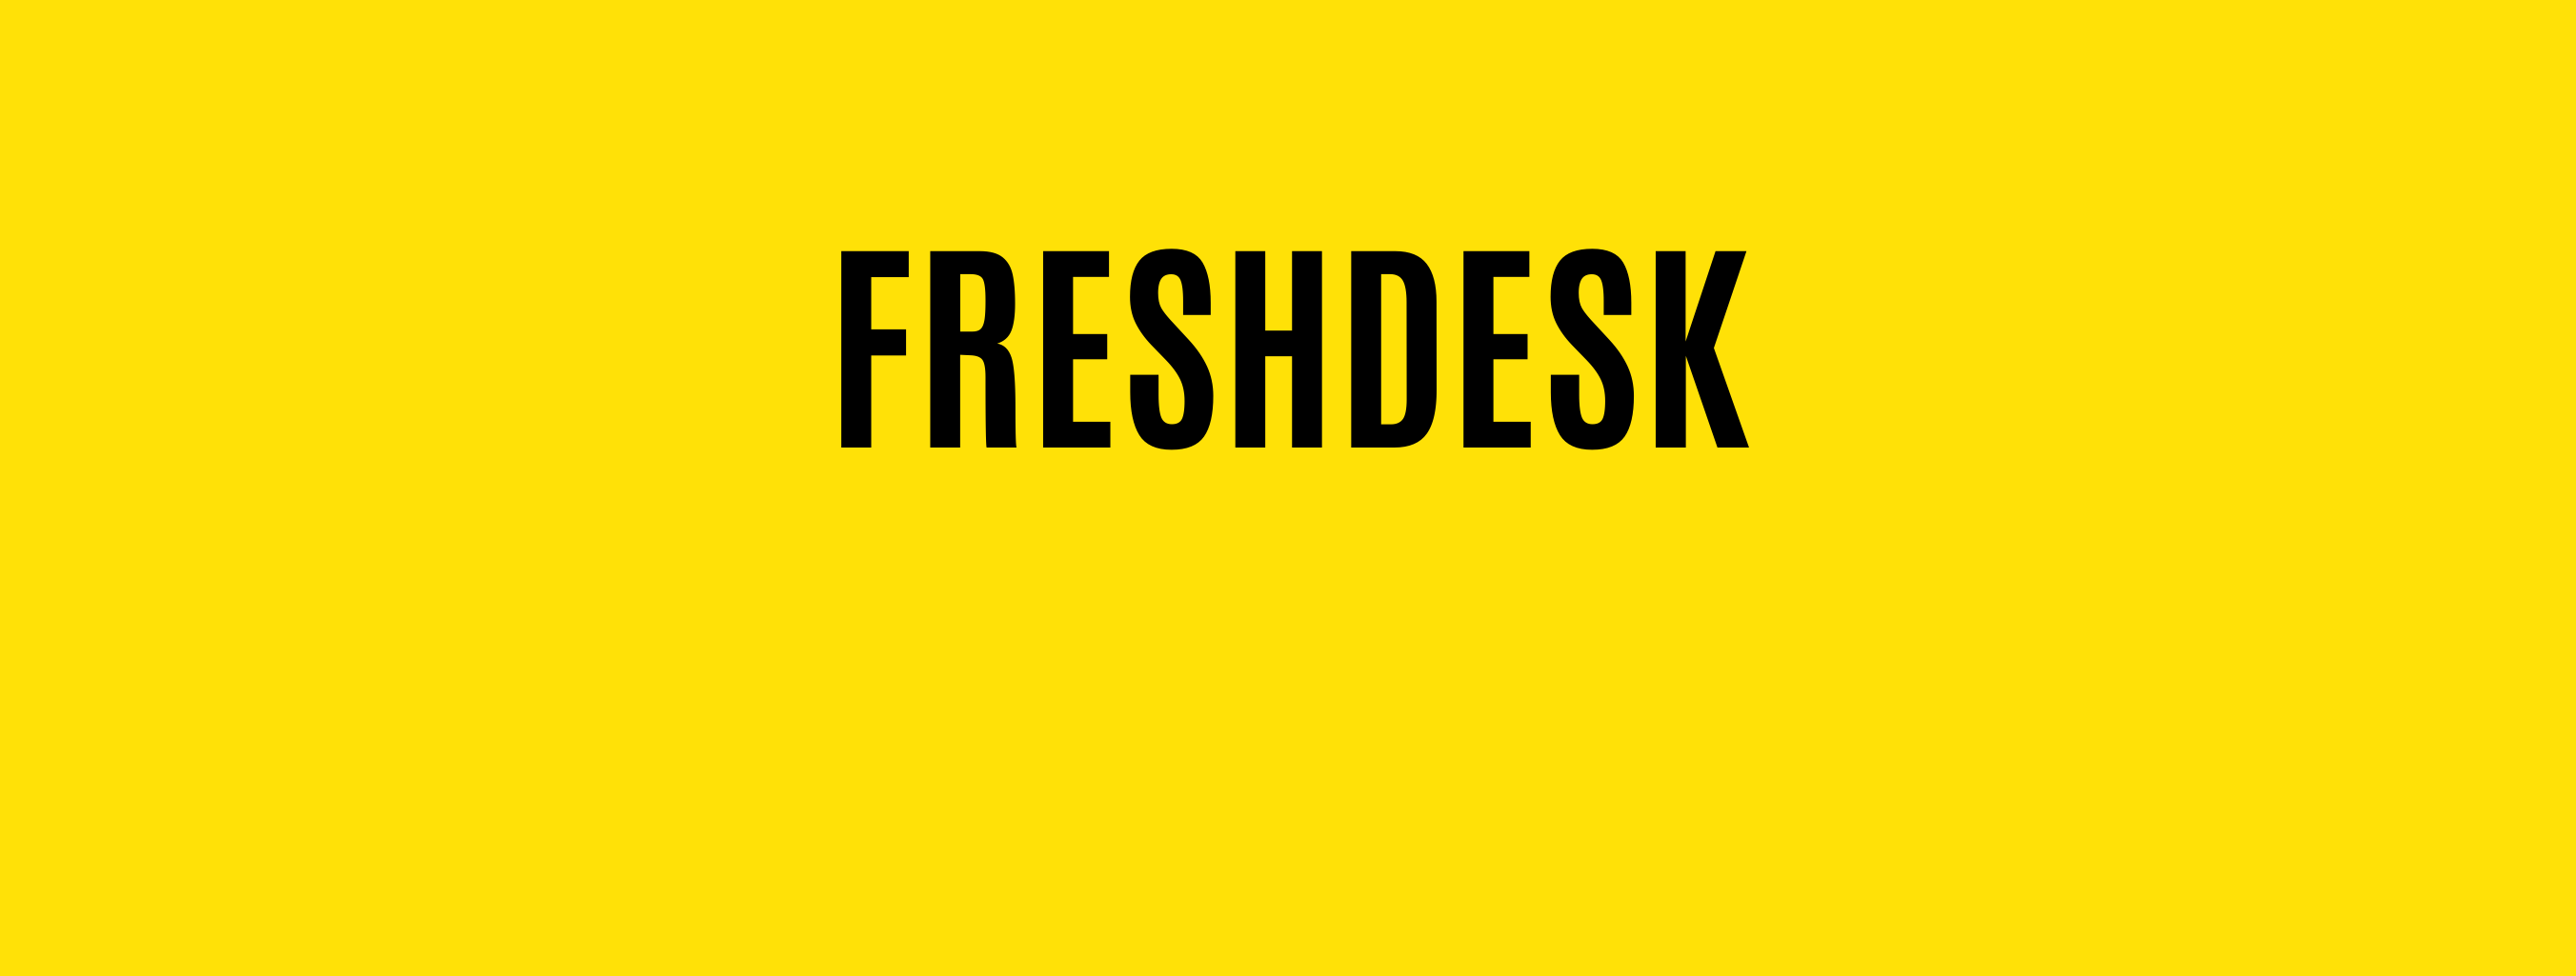 Hire Freshdesk Specialists - Customer Support